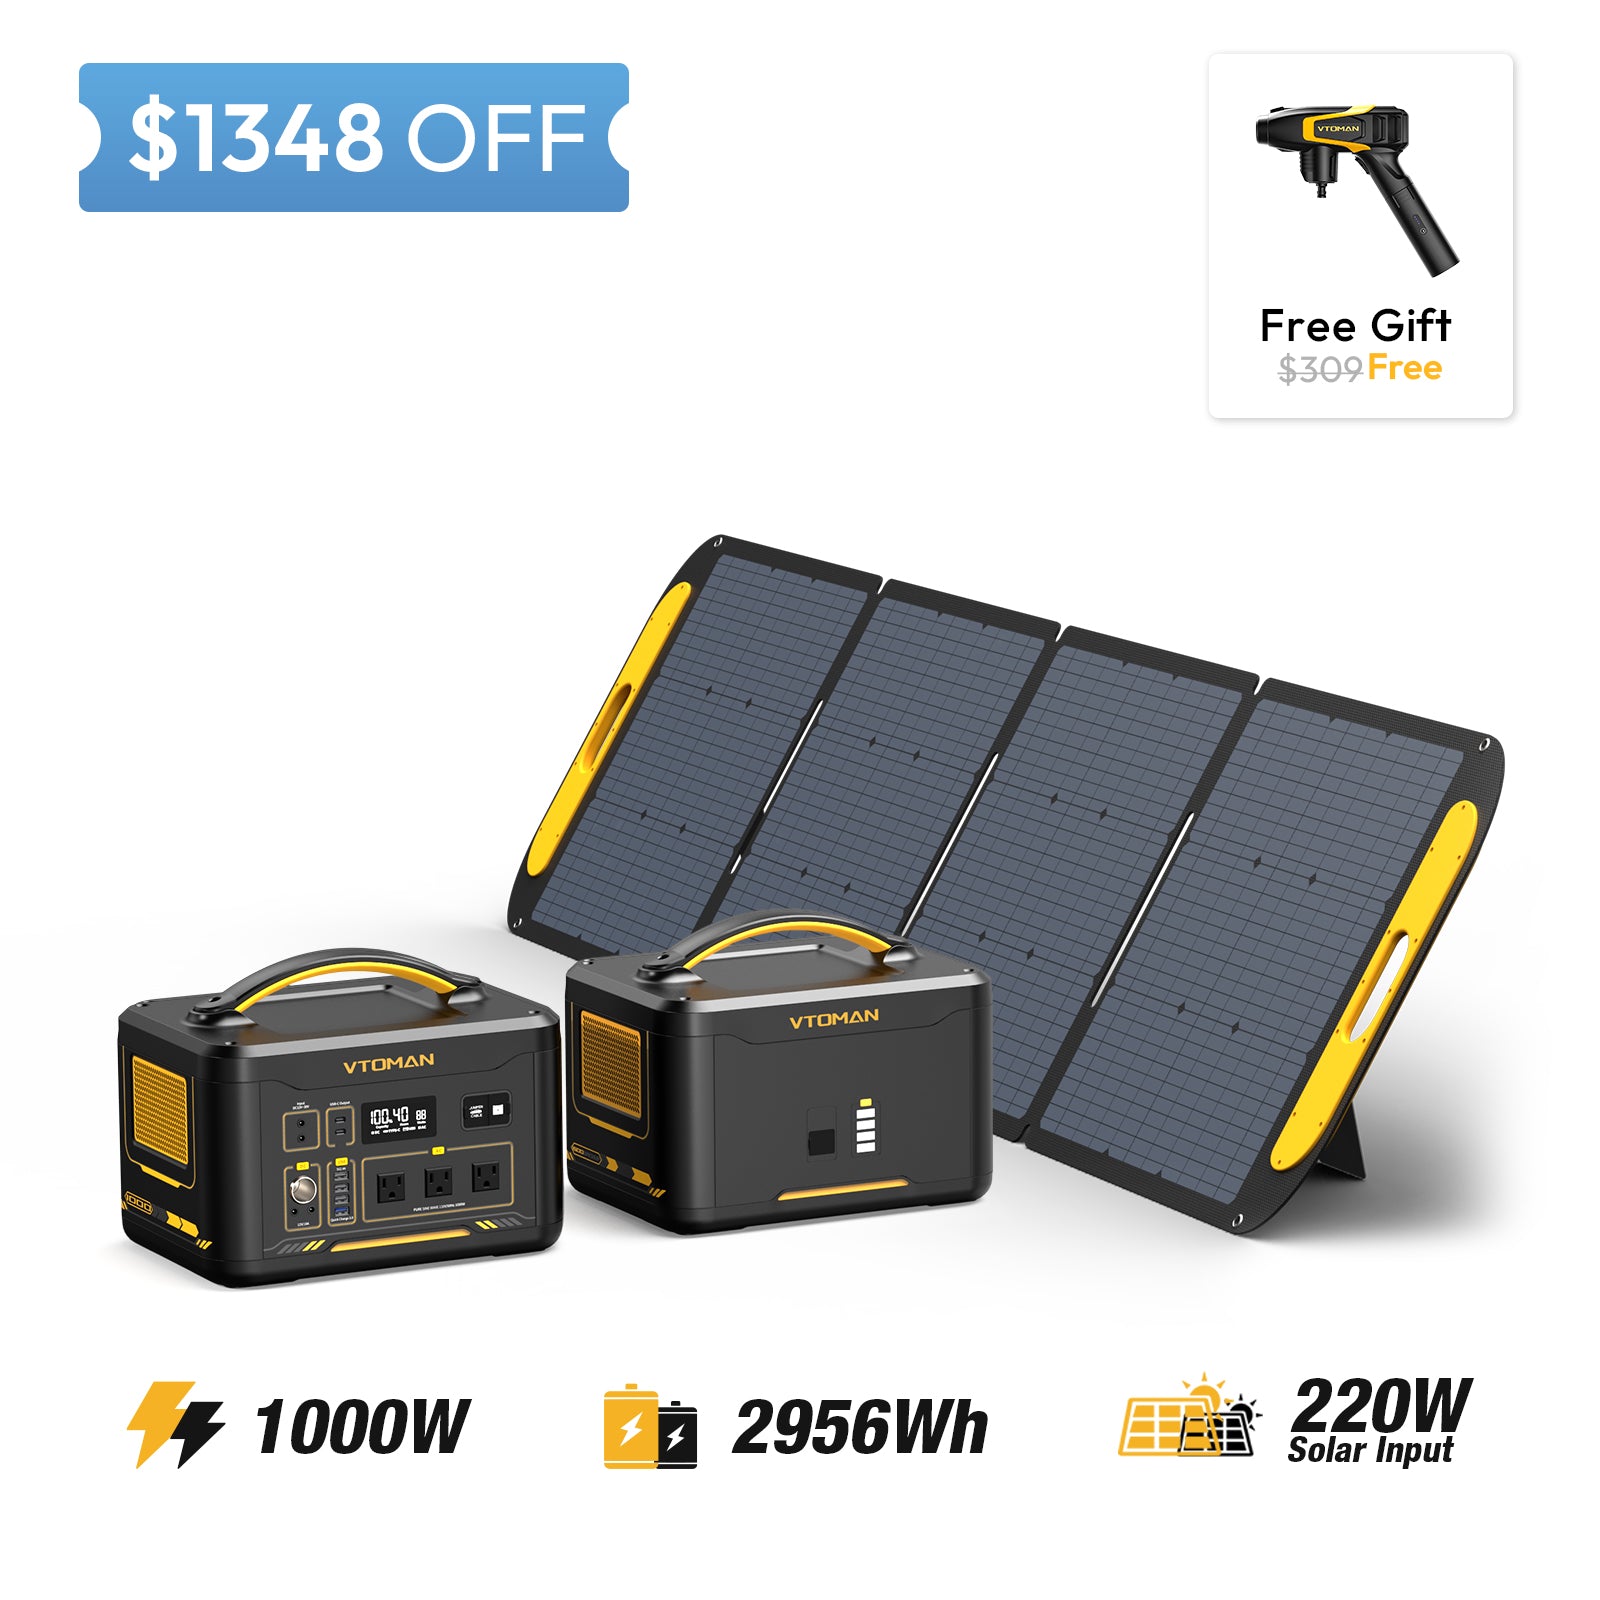 JUMP 1000-1548Wh extra battery-220W solar panel save $1348 in summer sale